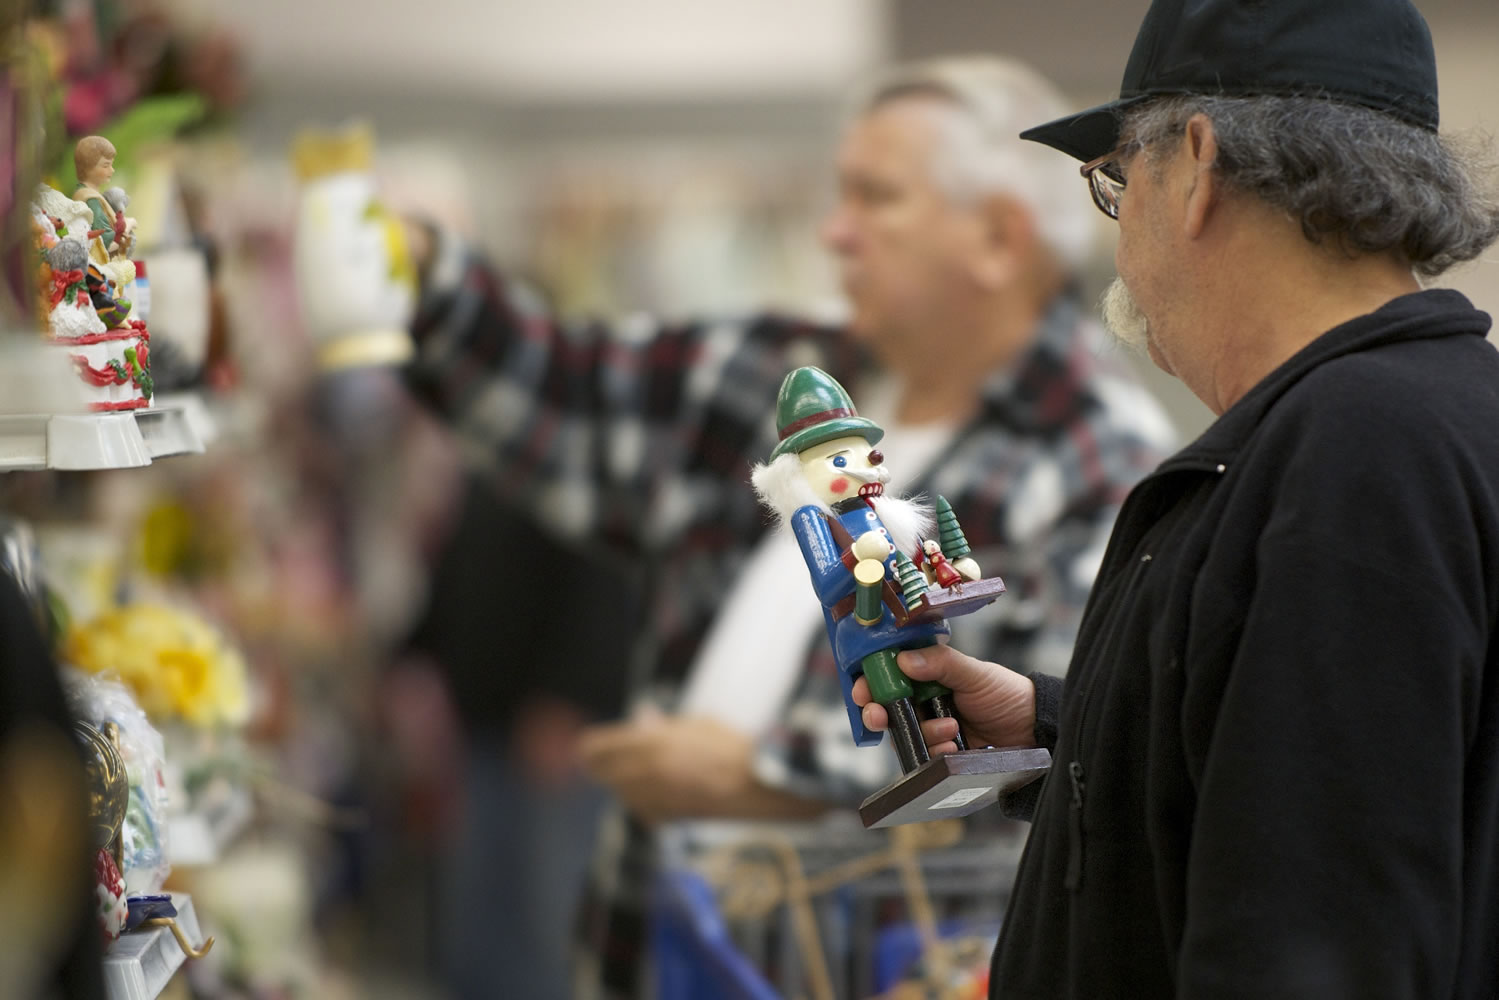 Fred Soto of Vancouver, foreground, eyes a nutcracker at the Goodwill store on Northeast Fourth Plain Boulevard to add to his collection of about 100 nutcrackers.